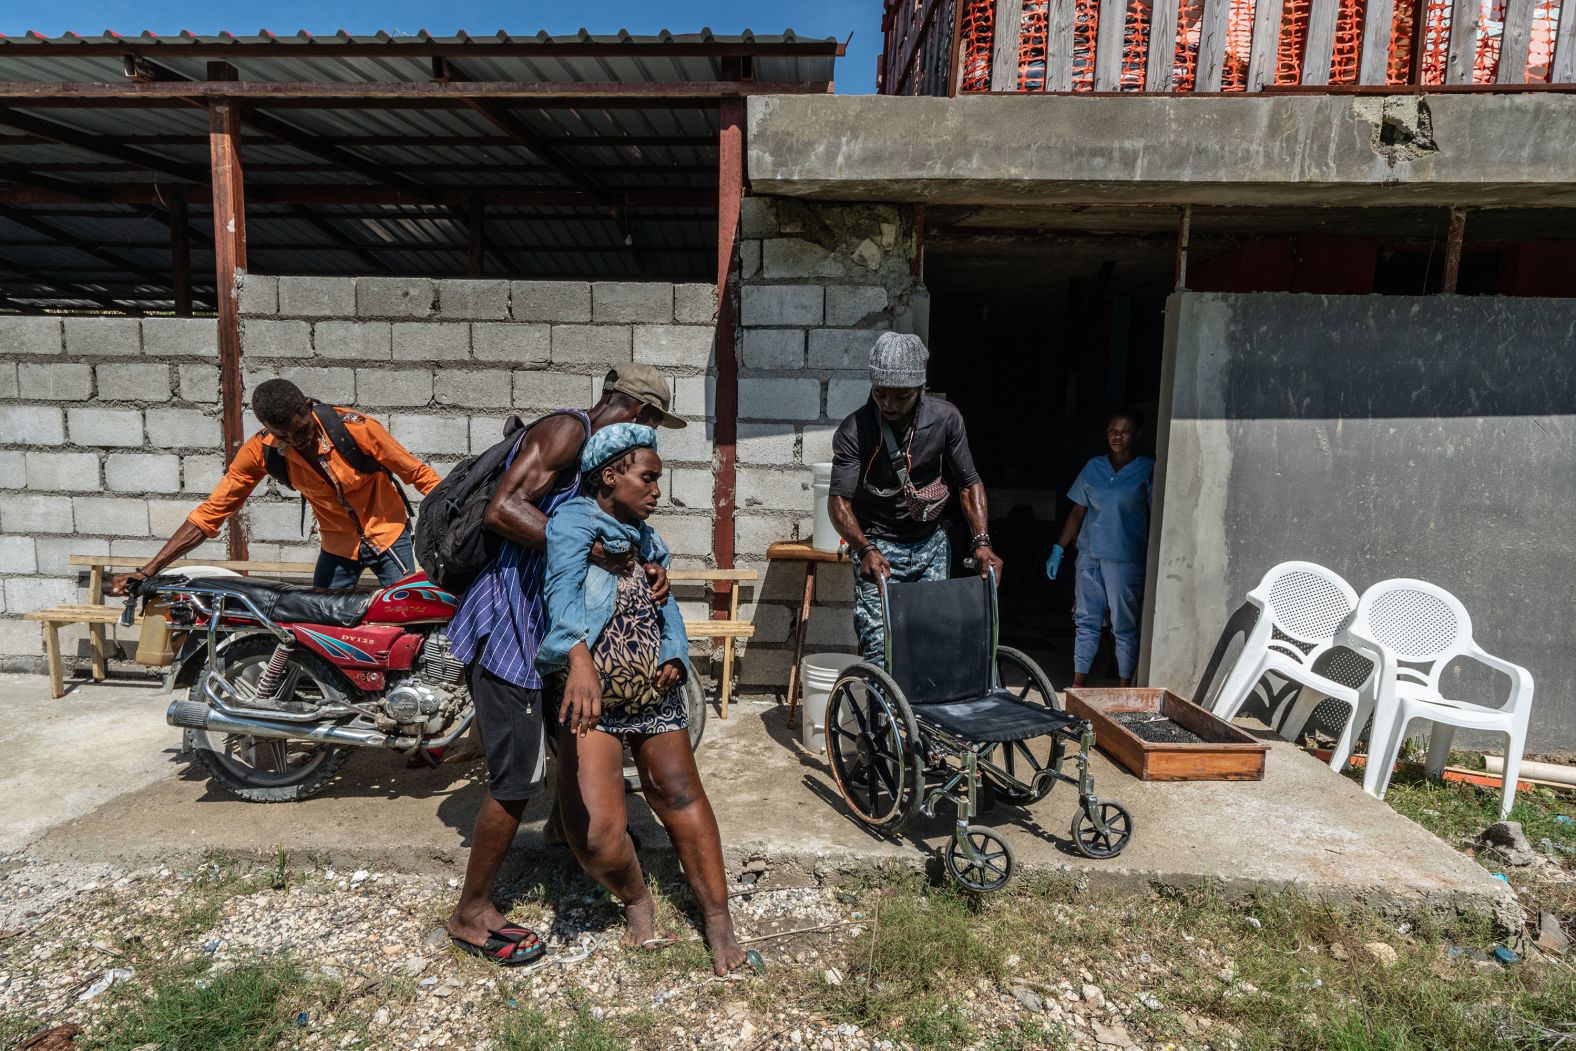 An ill woman is dropped off by a friend at the UNICEF-supported Fontaine Hospital in Port-au-Prince. The Fontaine Hospital provides free health care in one of the most troubled areas of Port-au-Prince.